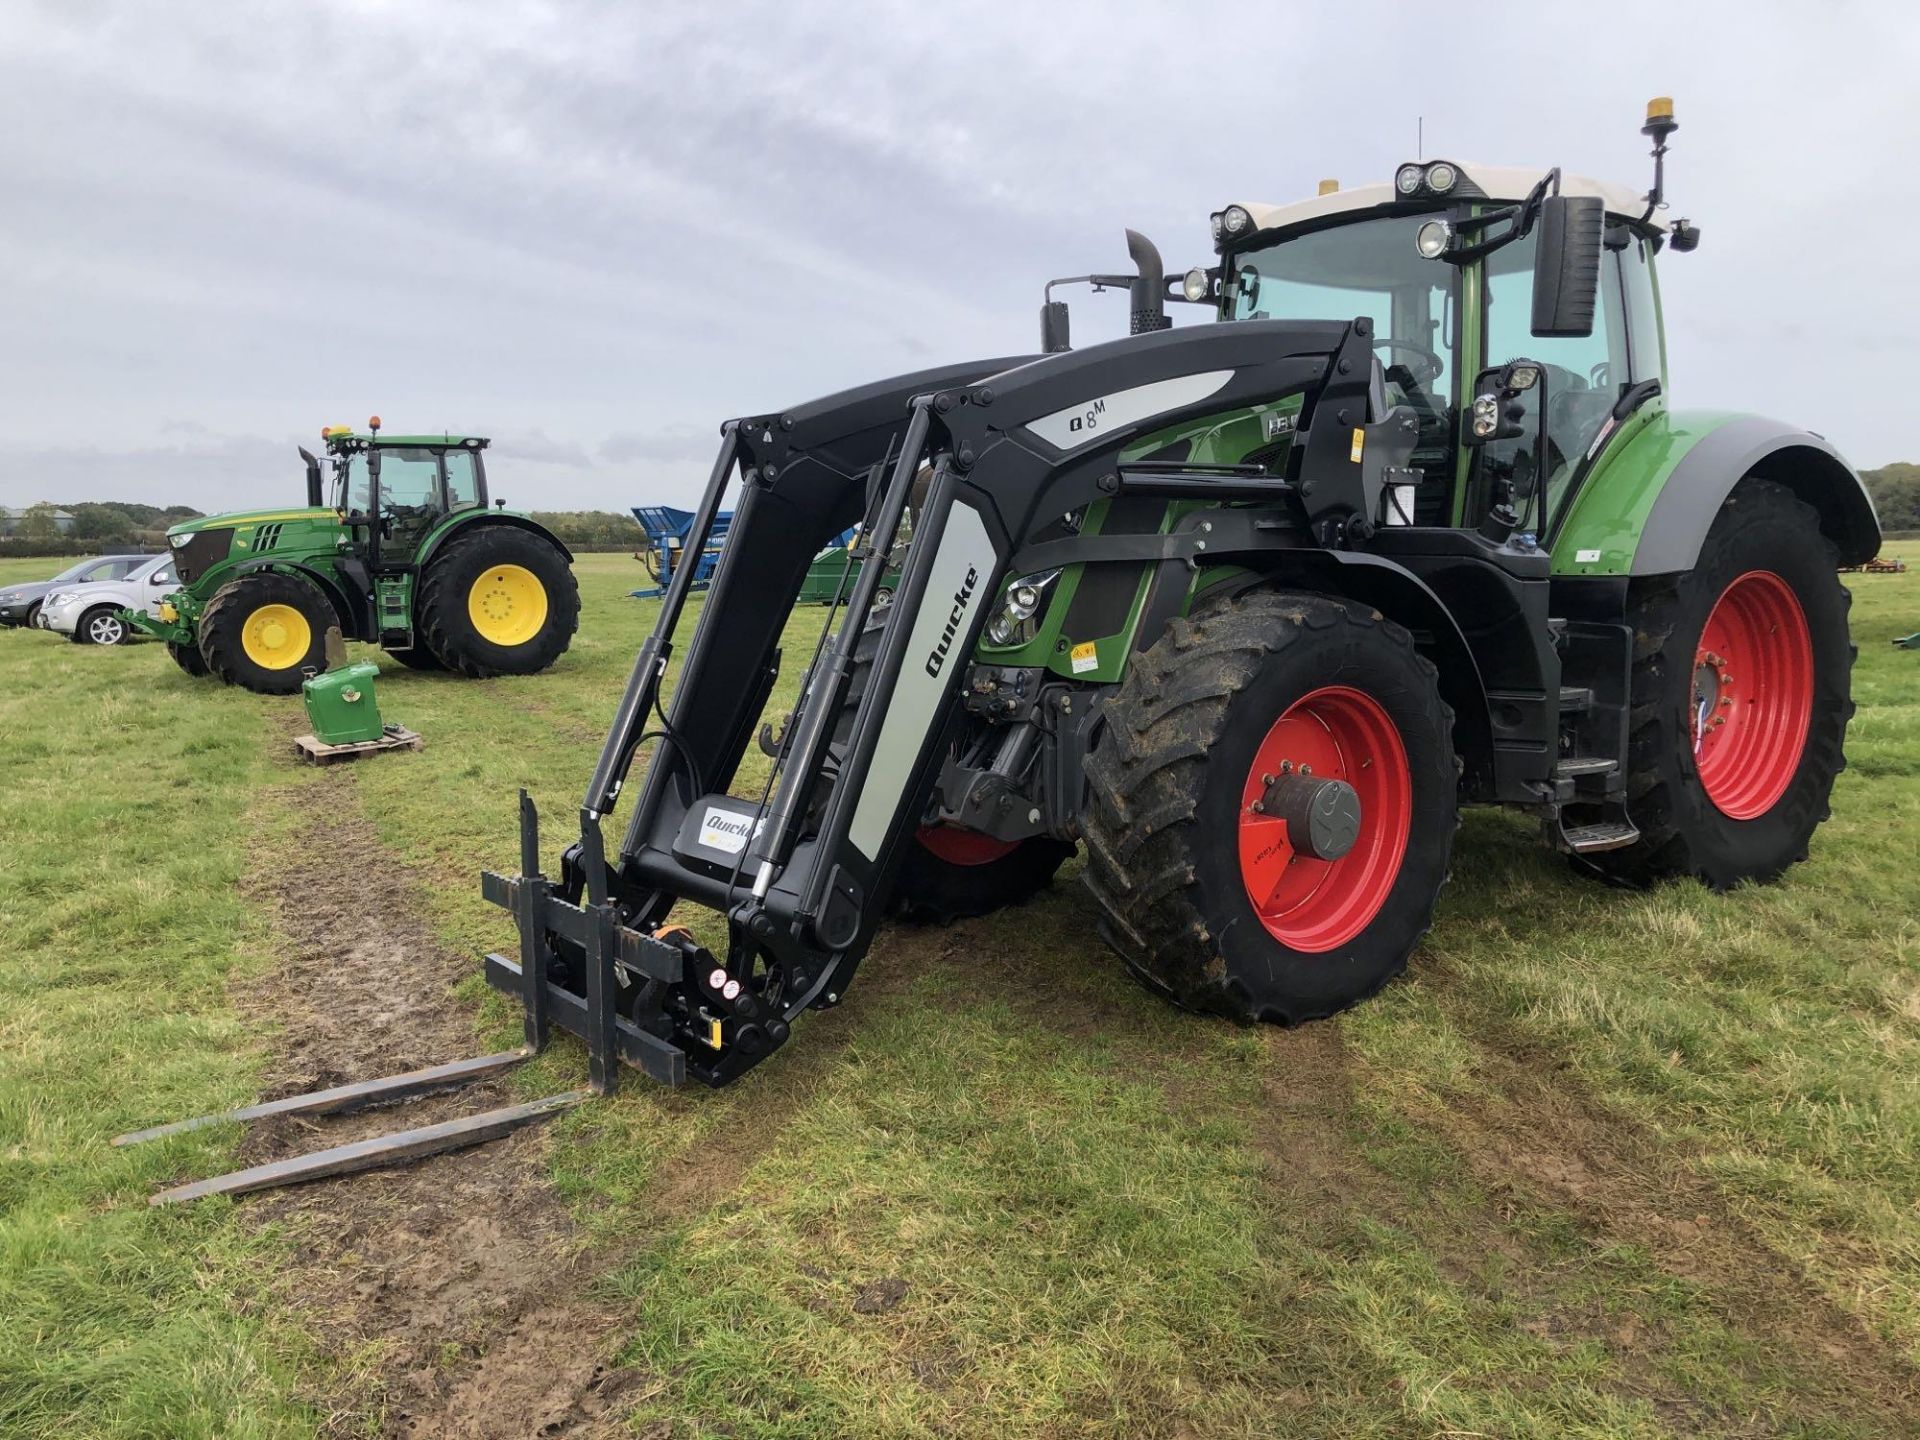 2018 Fendt 828 Vario Profi Plus 65kph 4wd tractor with Quicke Q8M front loader and pallet tines, fro